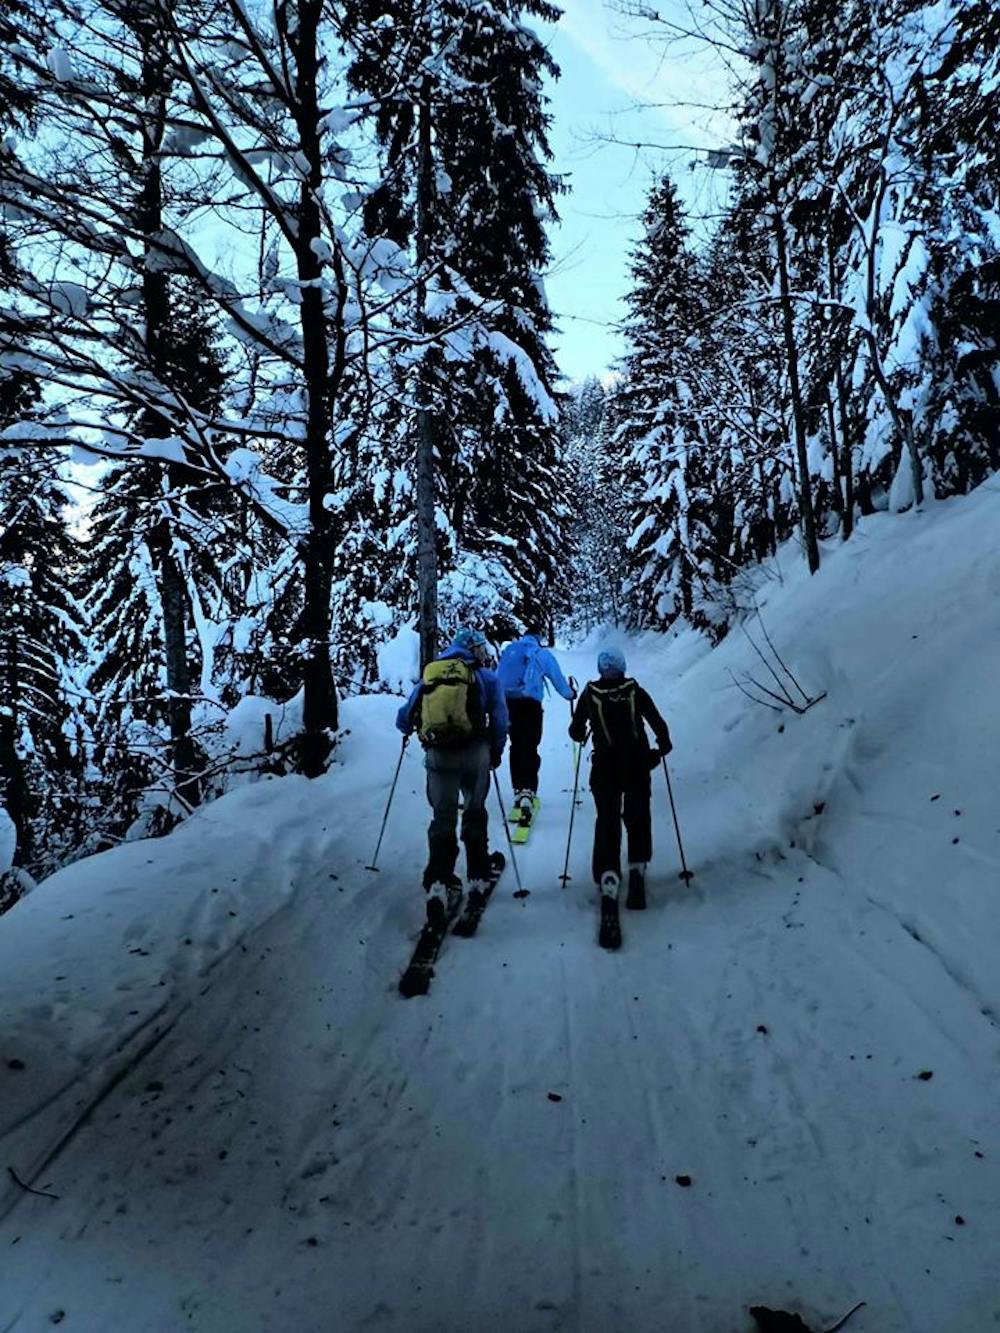 Skinning up the track in the forest towards the Môle.